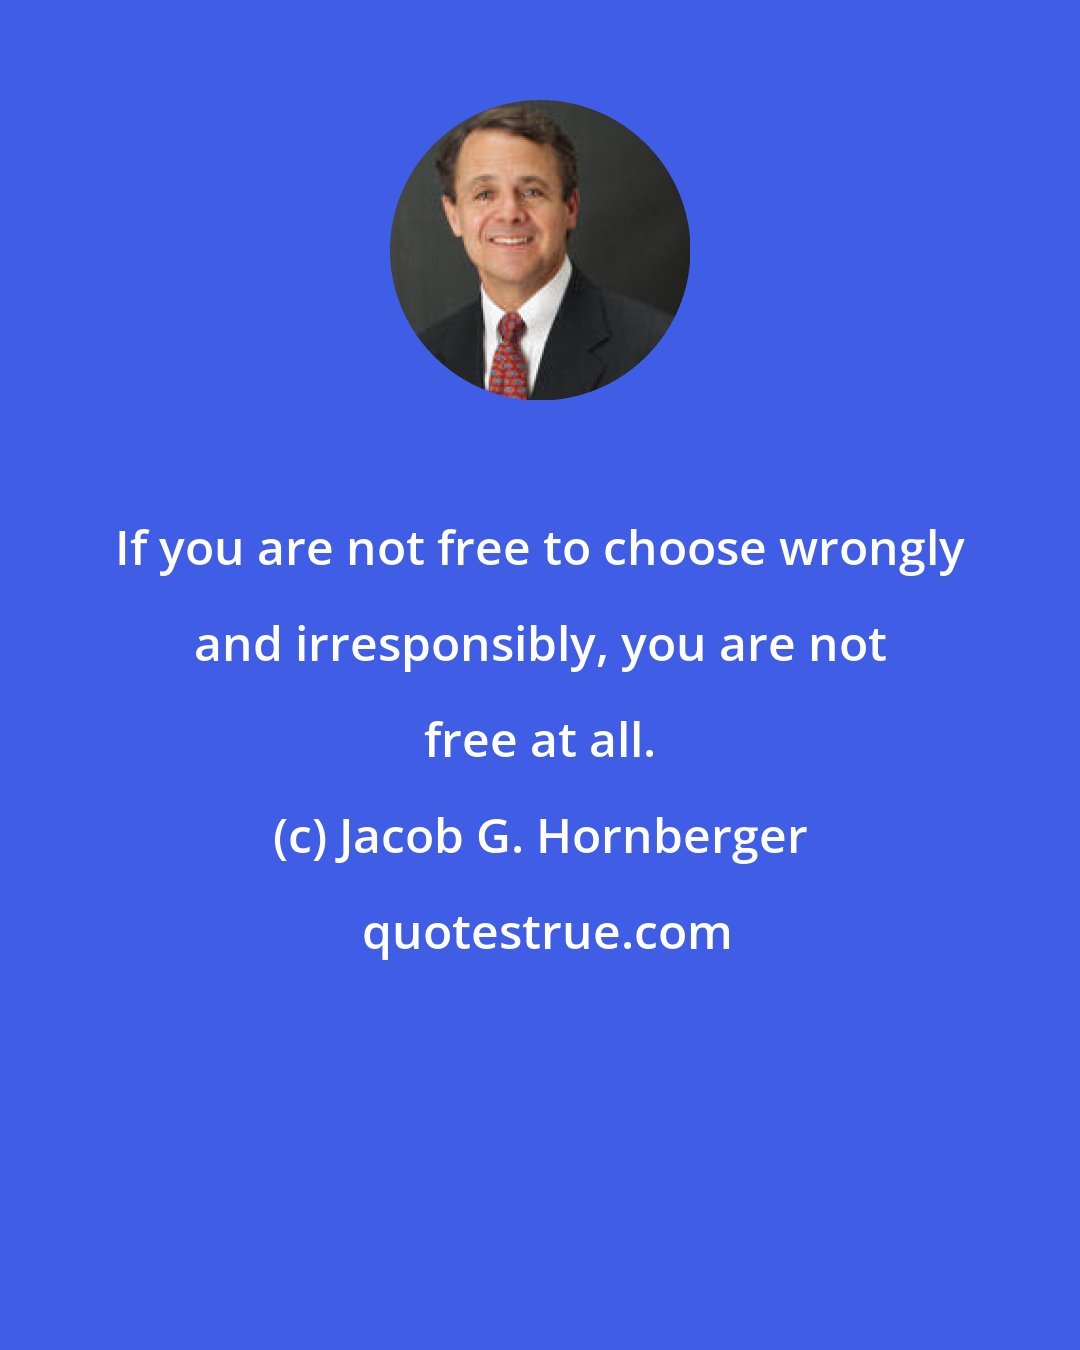 Jacob G. Hornberger: If you are not free to choose wrongly and irresponsibly, you are not free at all.